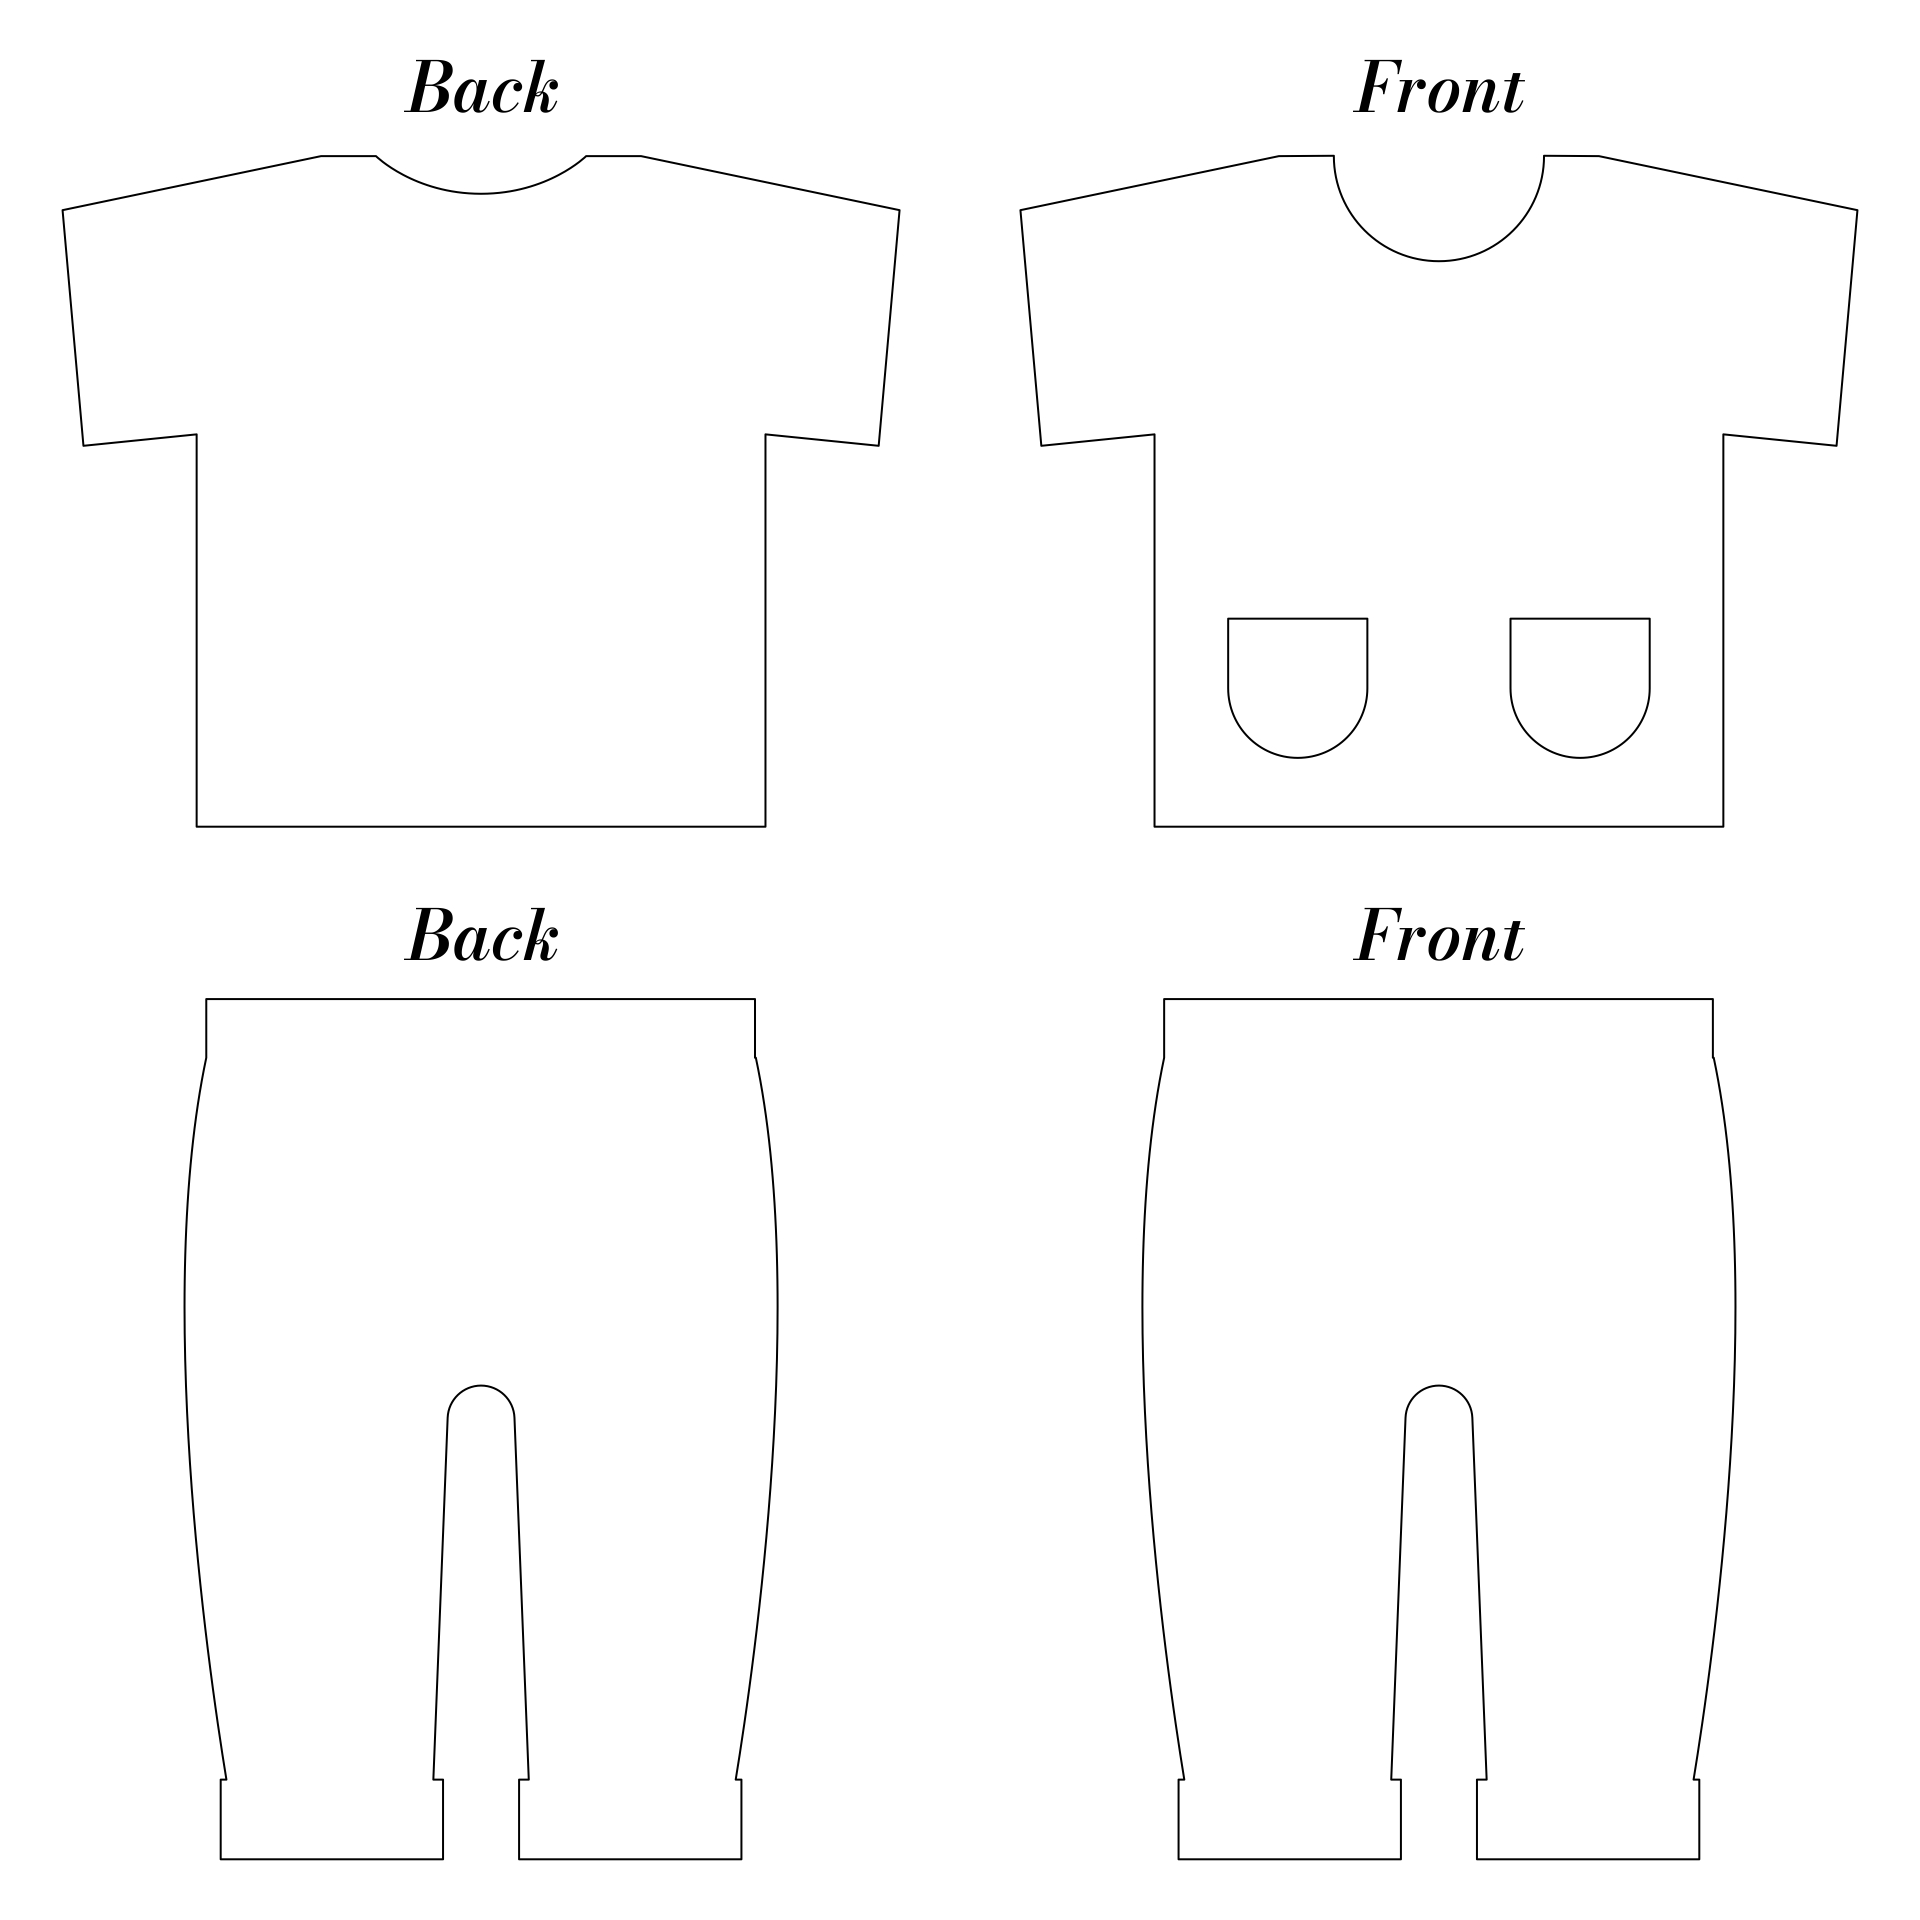 Free Printable 18 Doll Clothes Patterns